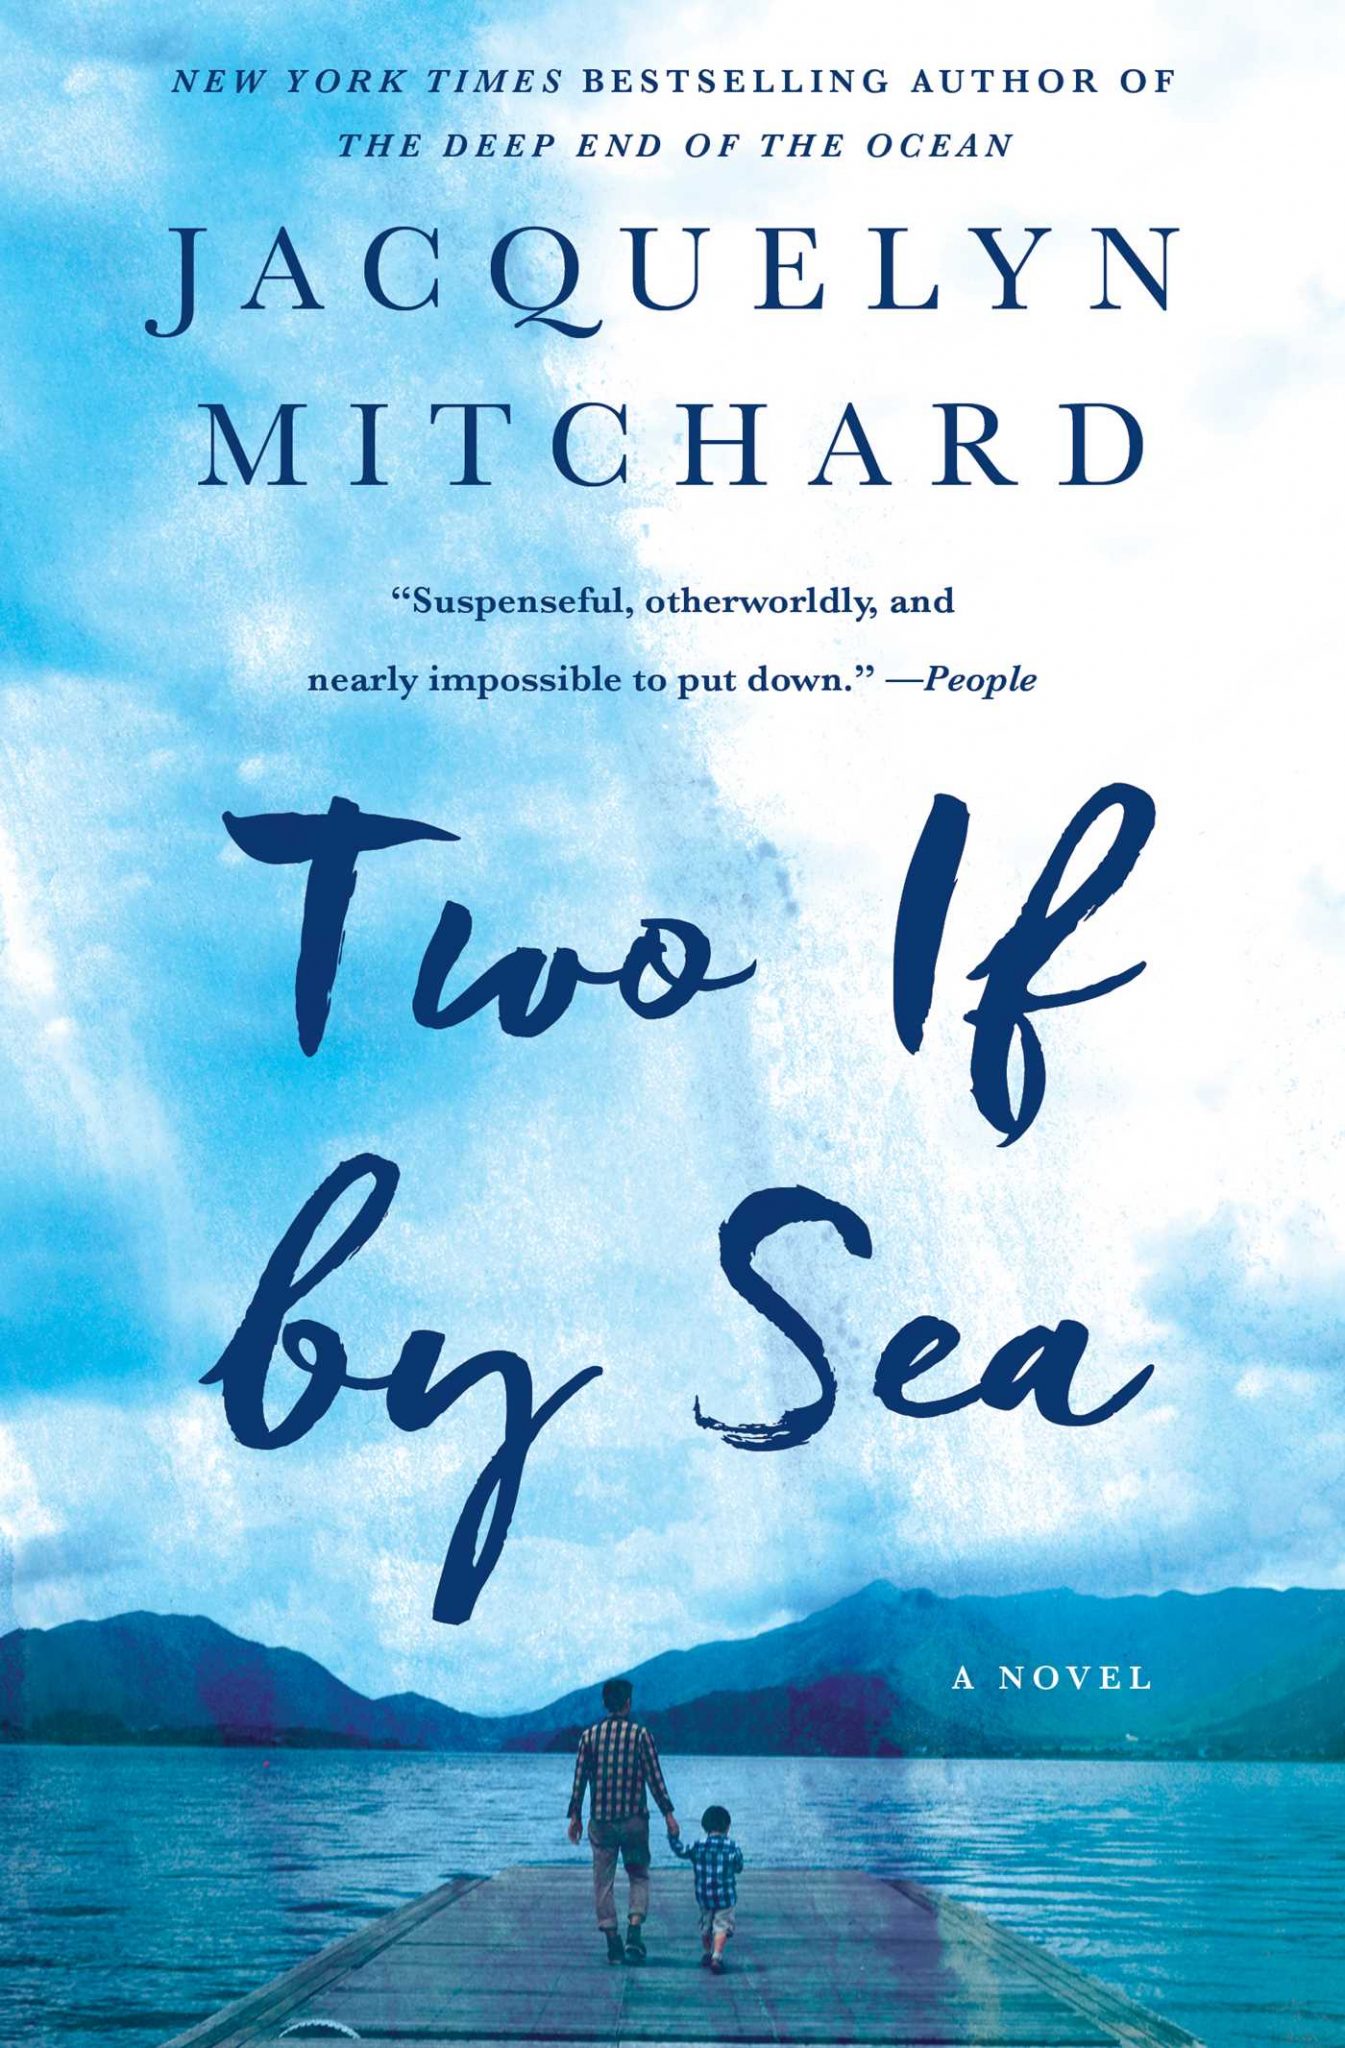 Two If by Sea by Jacquelyn Mitchard